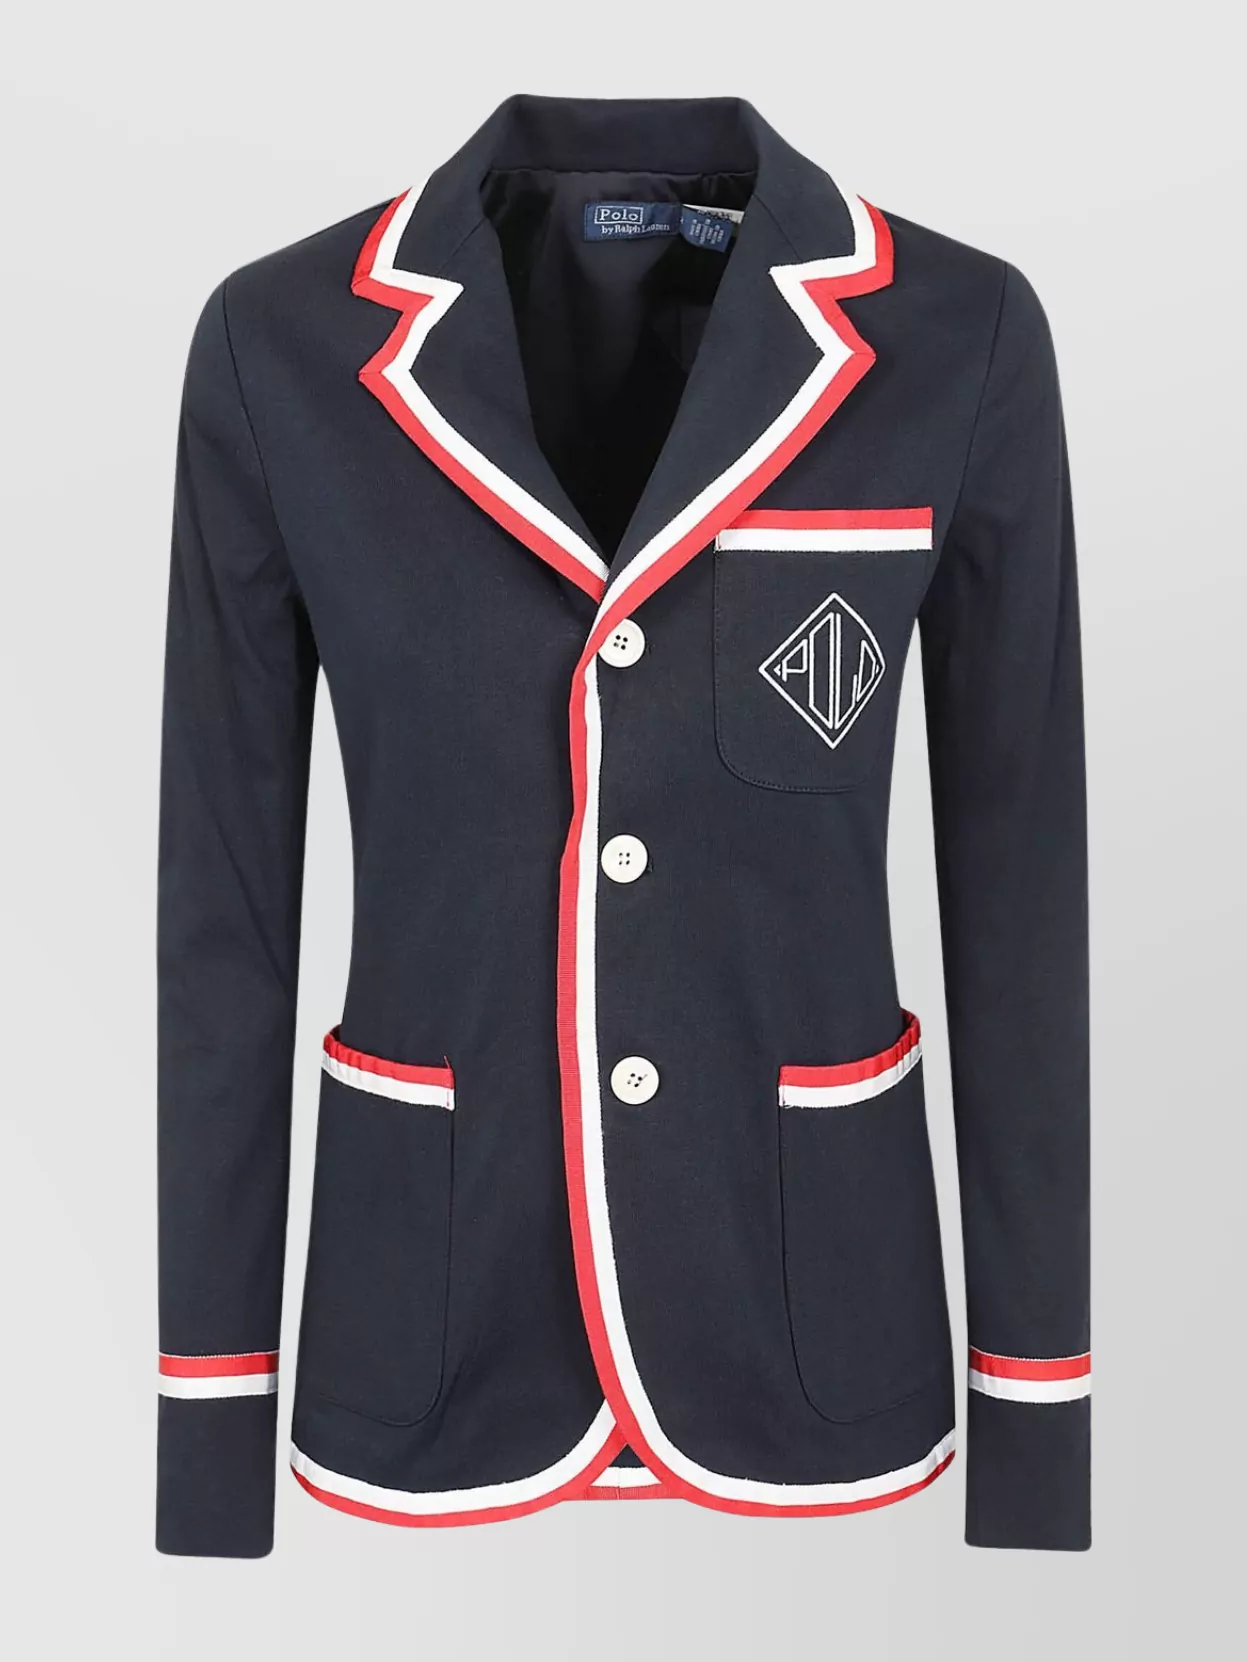 Shop Polo Ralph Lauren Cricket Blazer With Notch Lapel And Contrast Piping